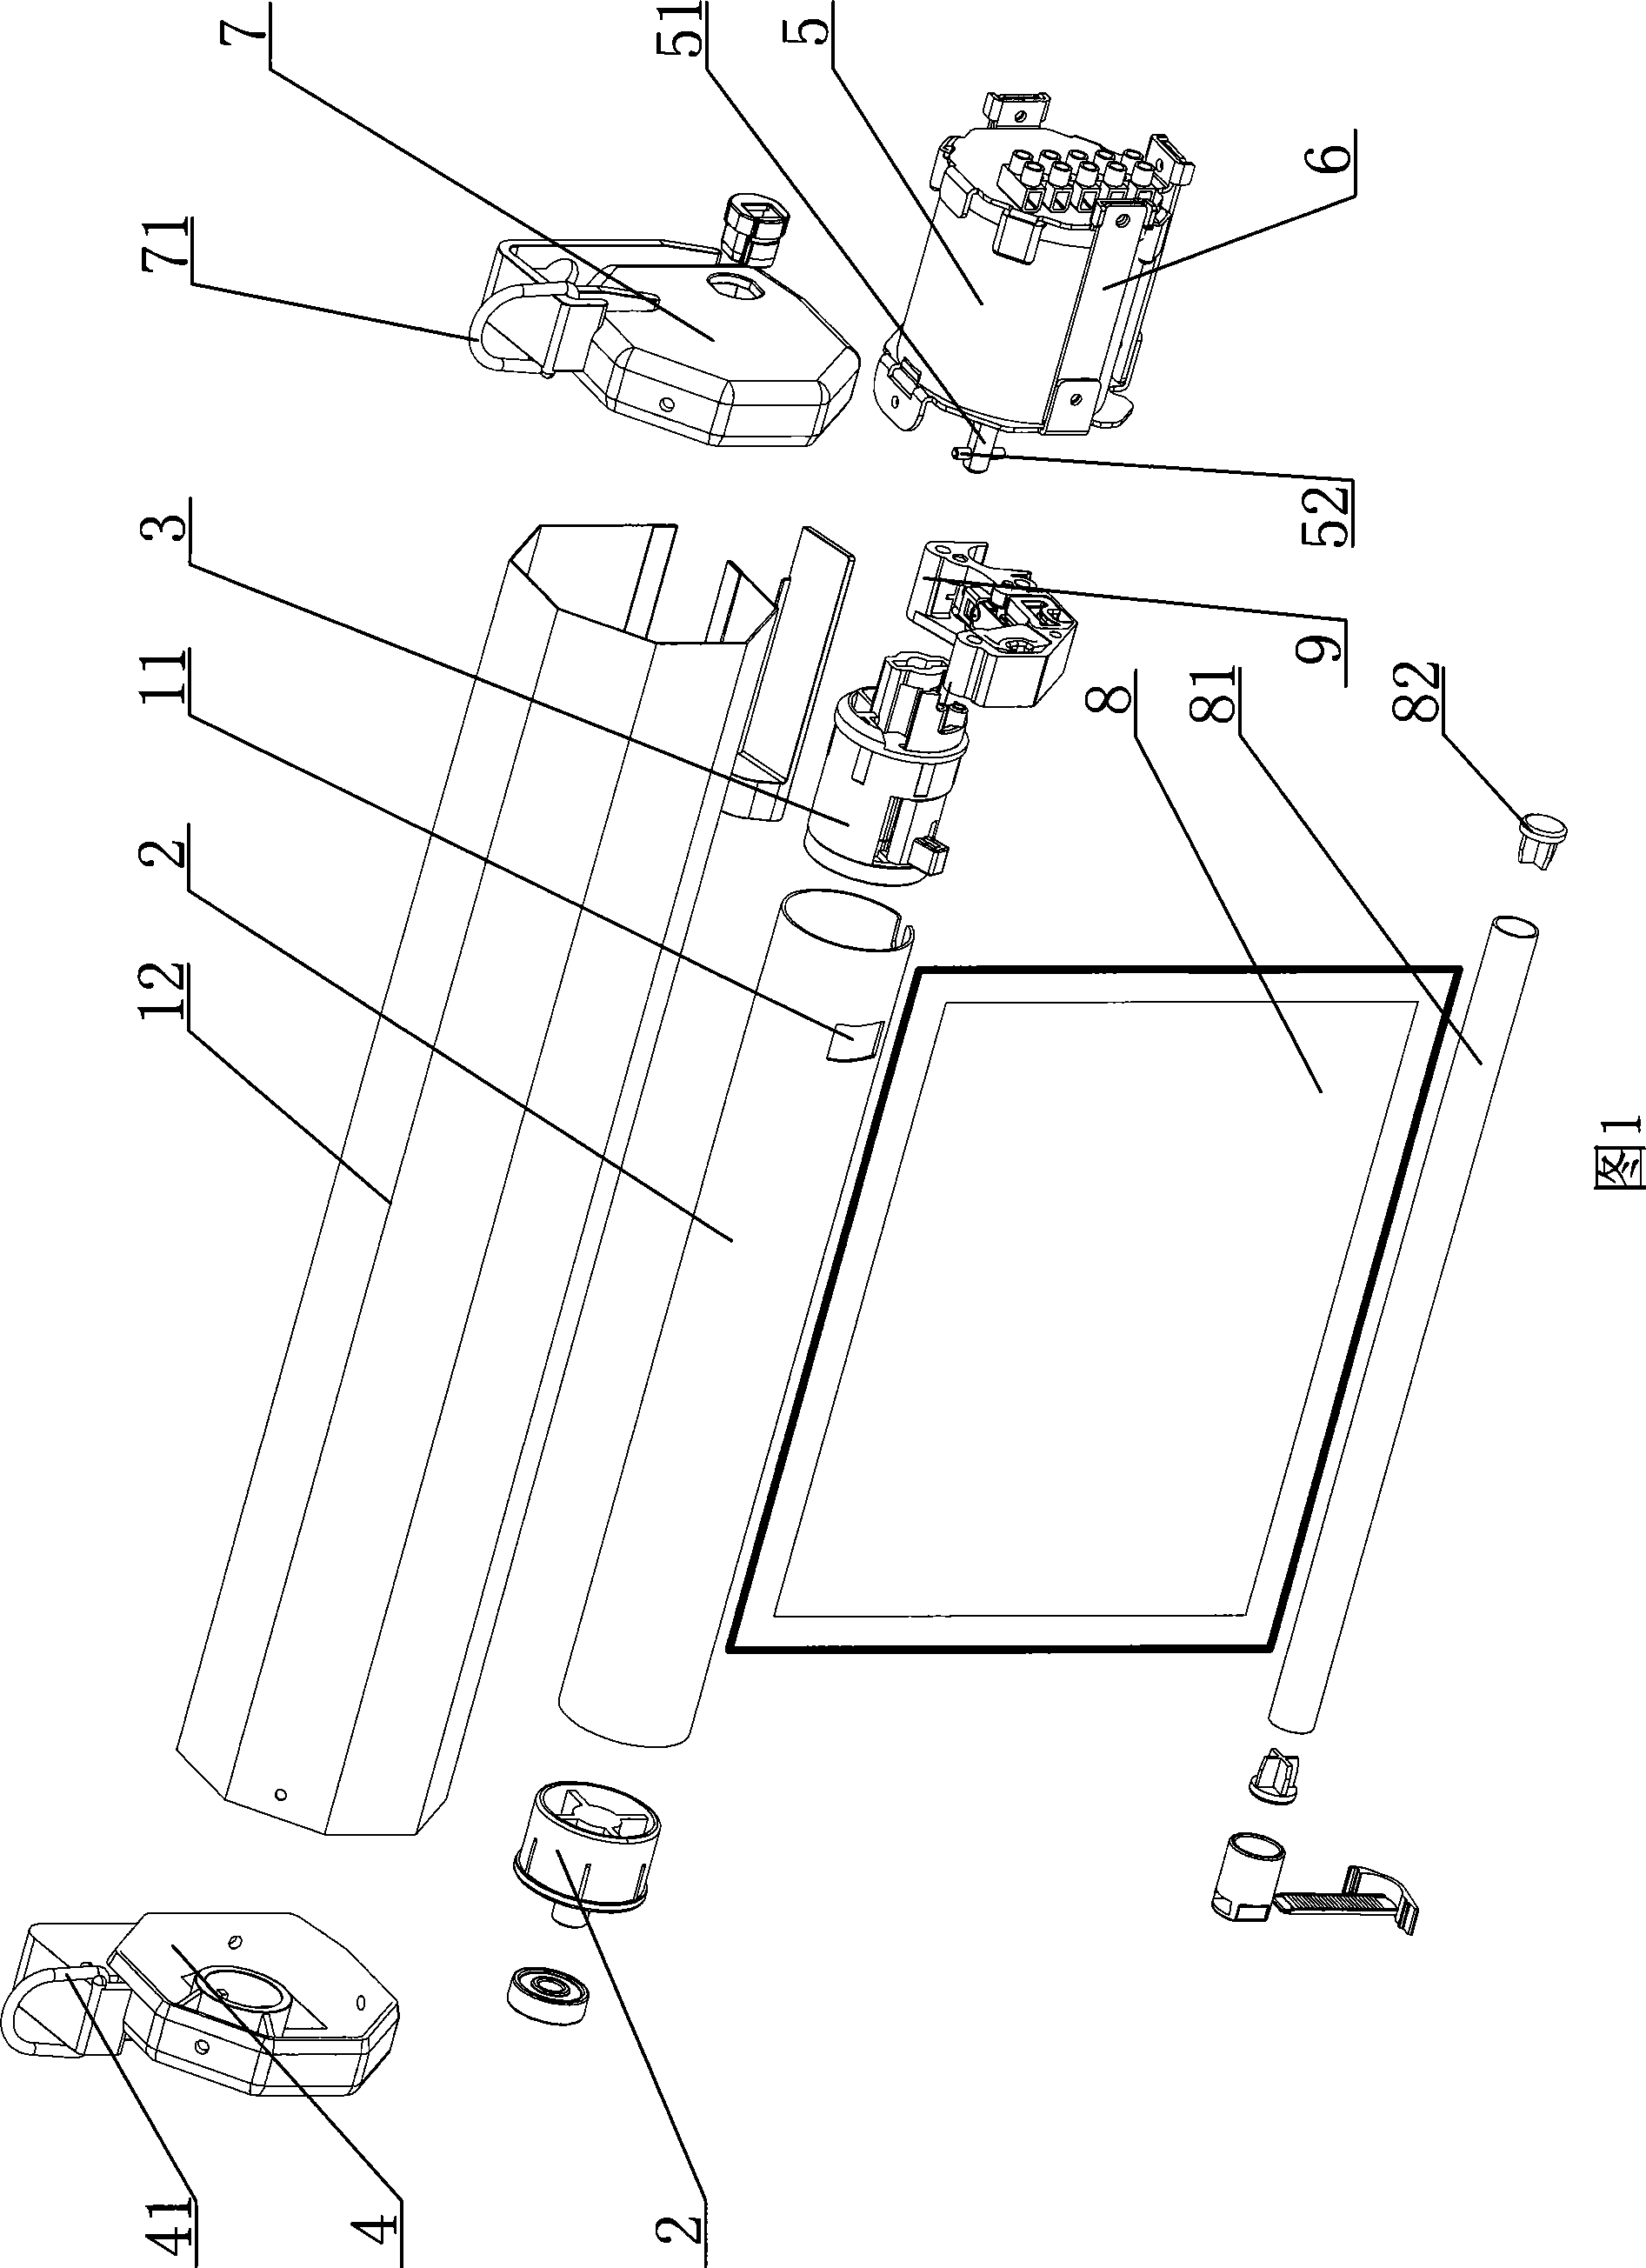 Electric coiling spacing detection device